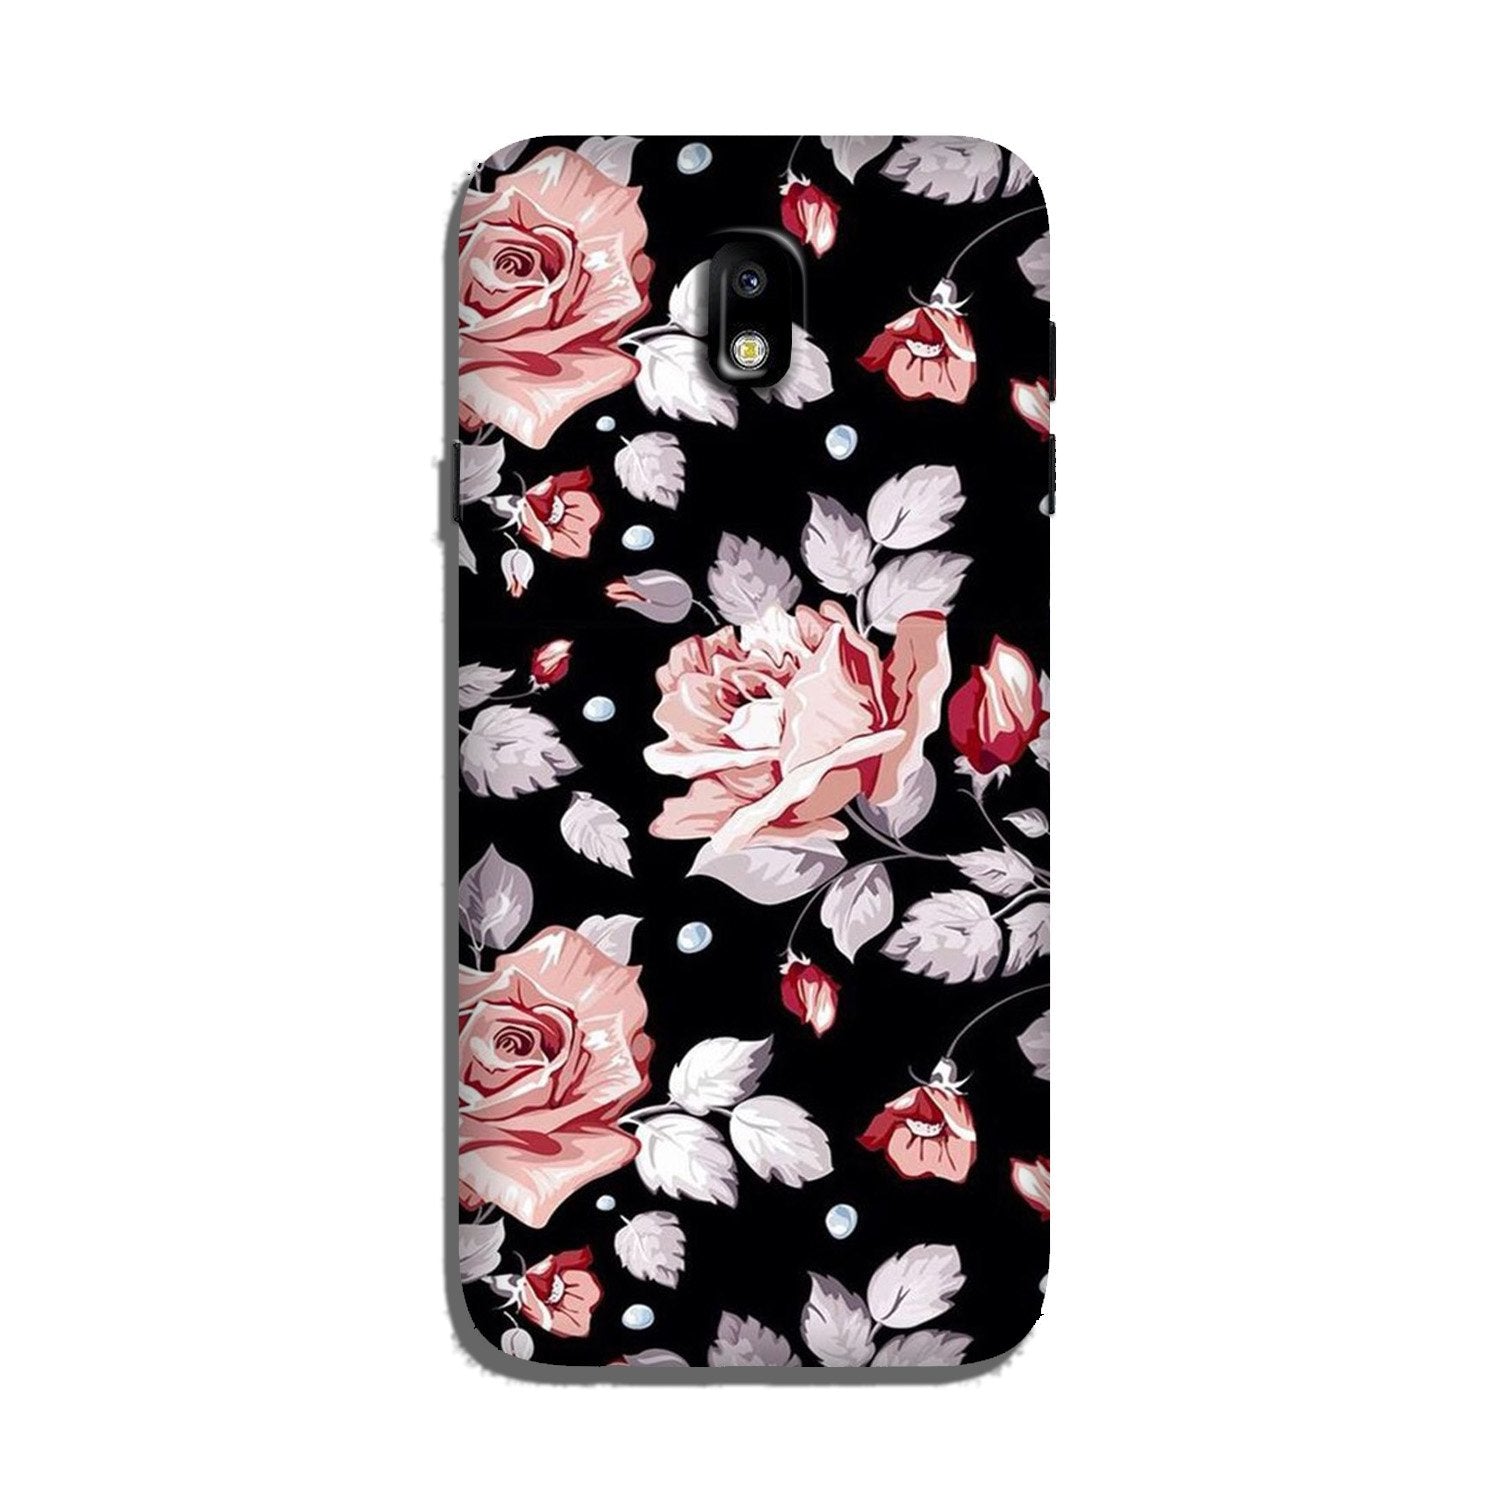 Pink rose Case for Galaxy J3 Pro